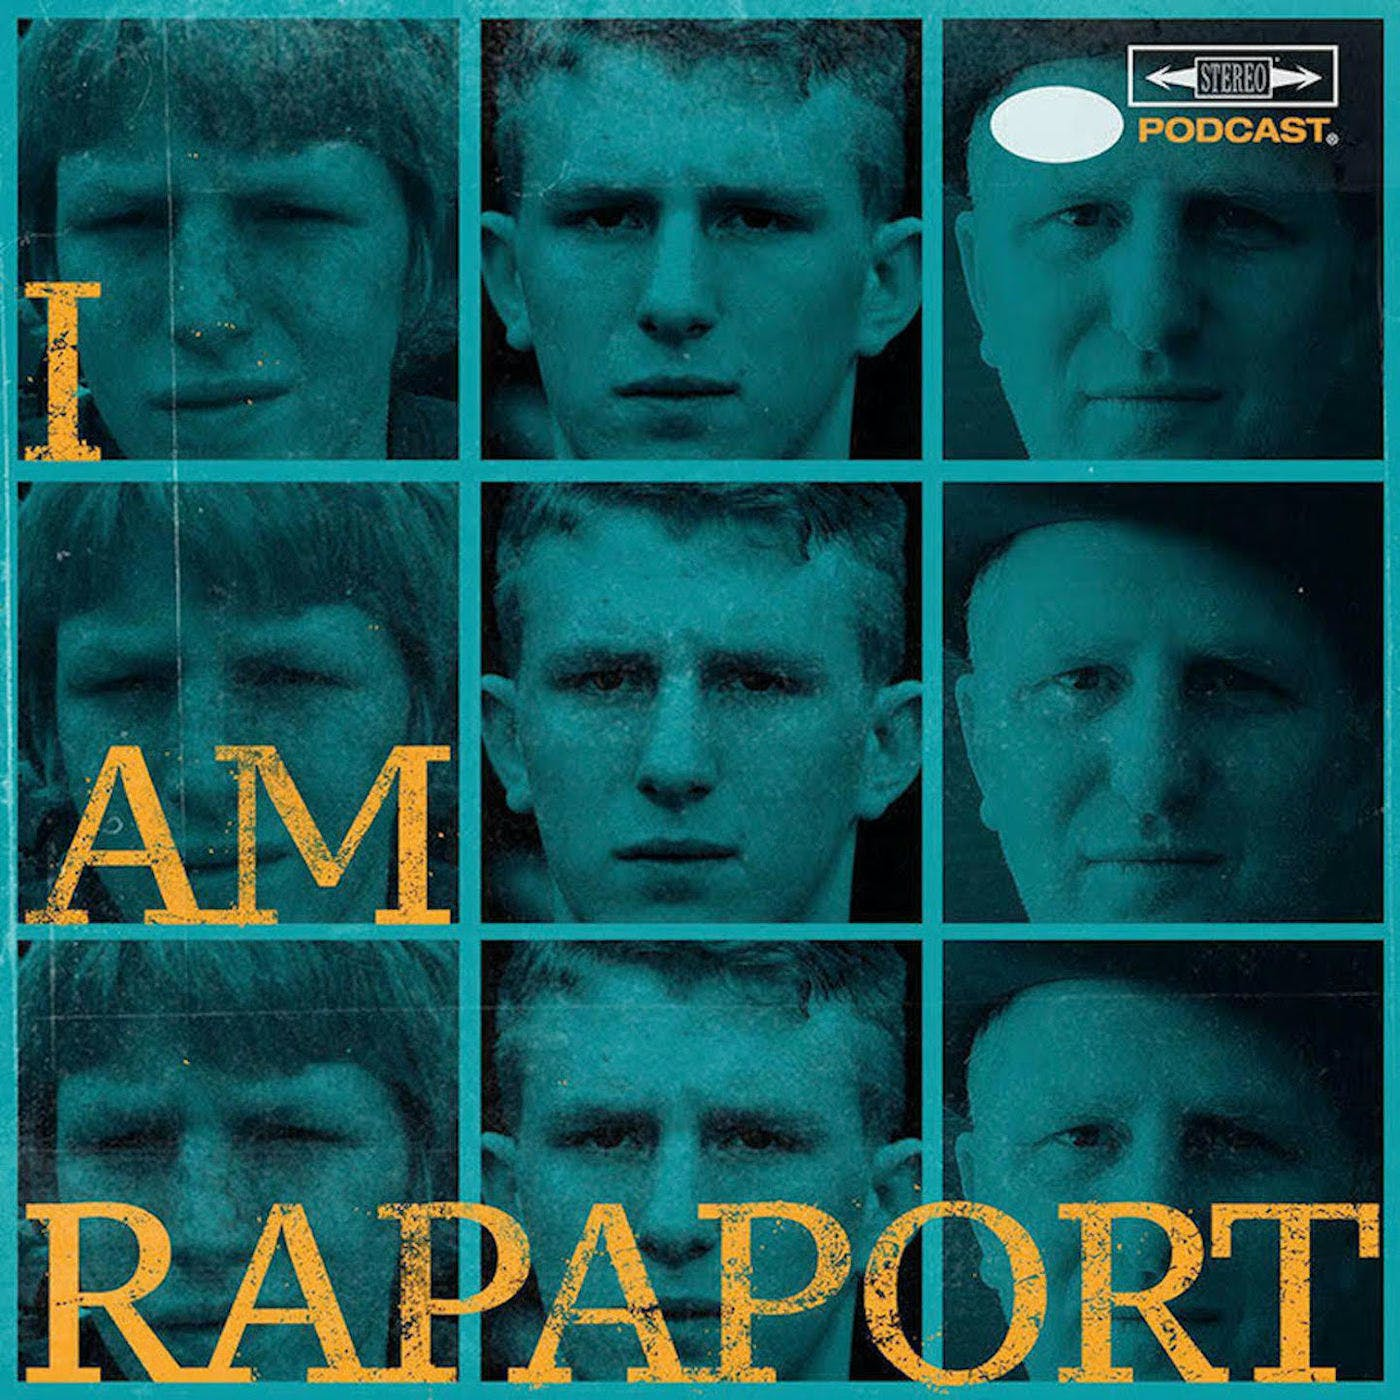 EP 193 - LIVE FROM CHICAGO, ILLINOIS! MICHAEL RAPAPORT AND GERALD MOODY - I AM RAPAPORT: STEREO PODCAST 3 CITY WORLD TOUR